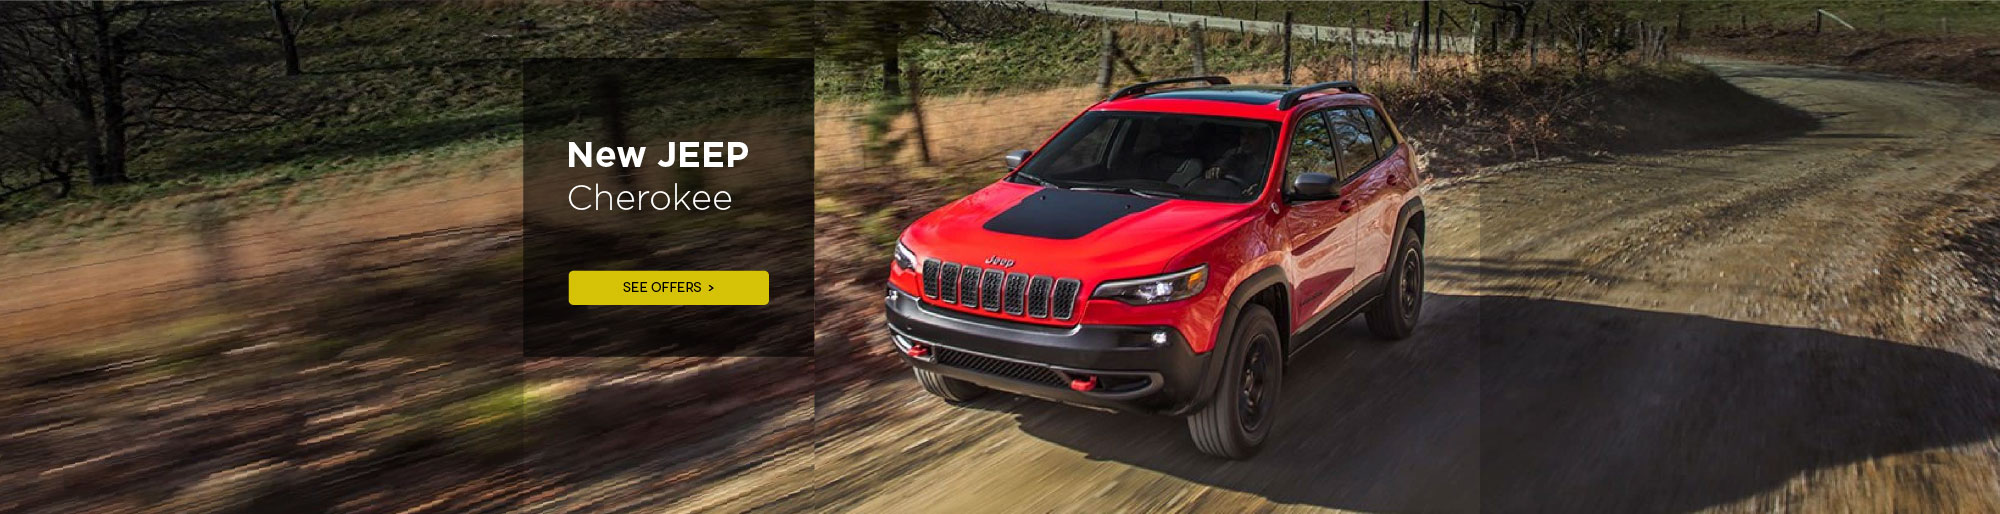 New and Used Car Dealer | Lithia Chrysler Dodge Jeep Ram of Portland